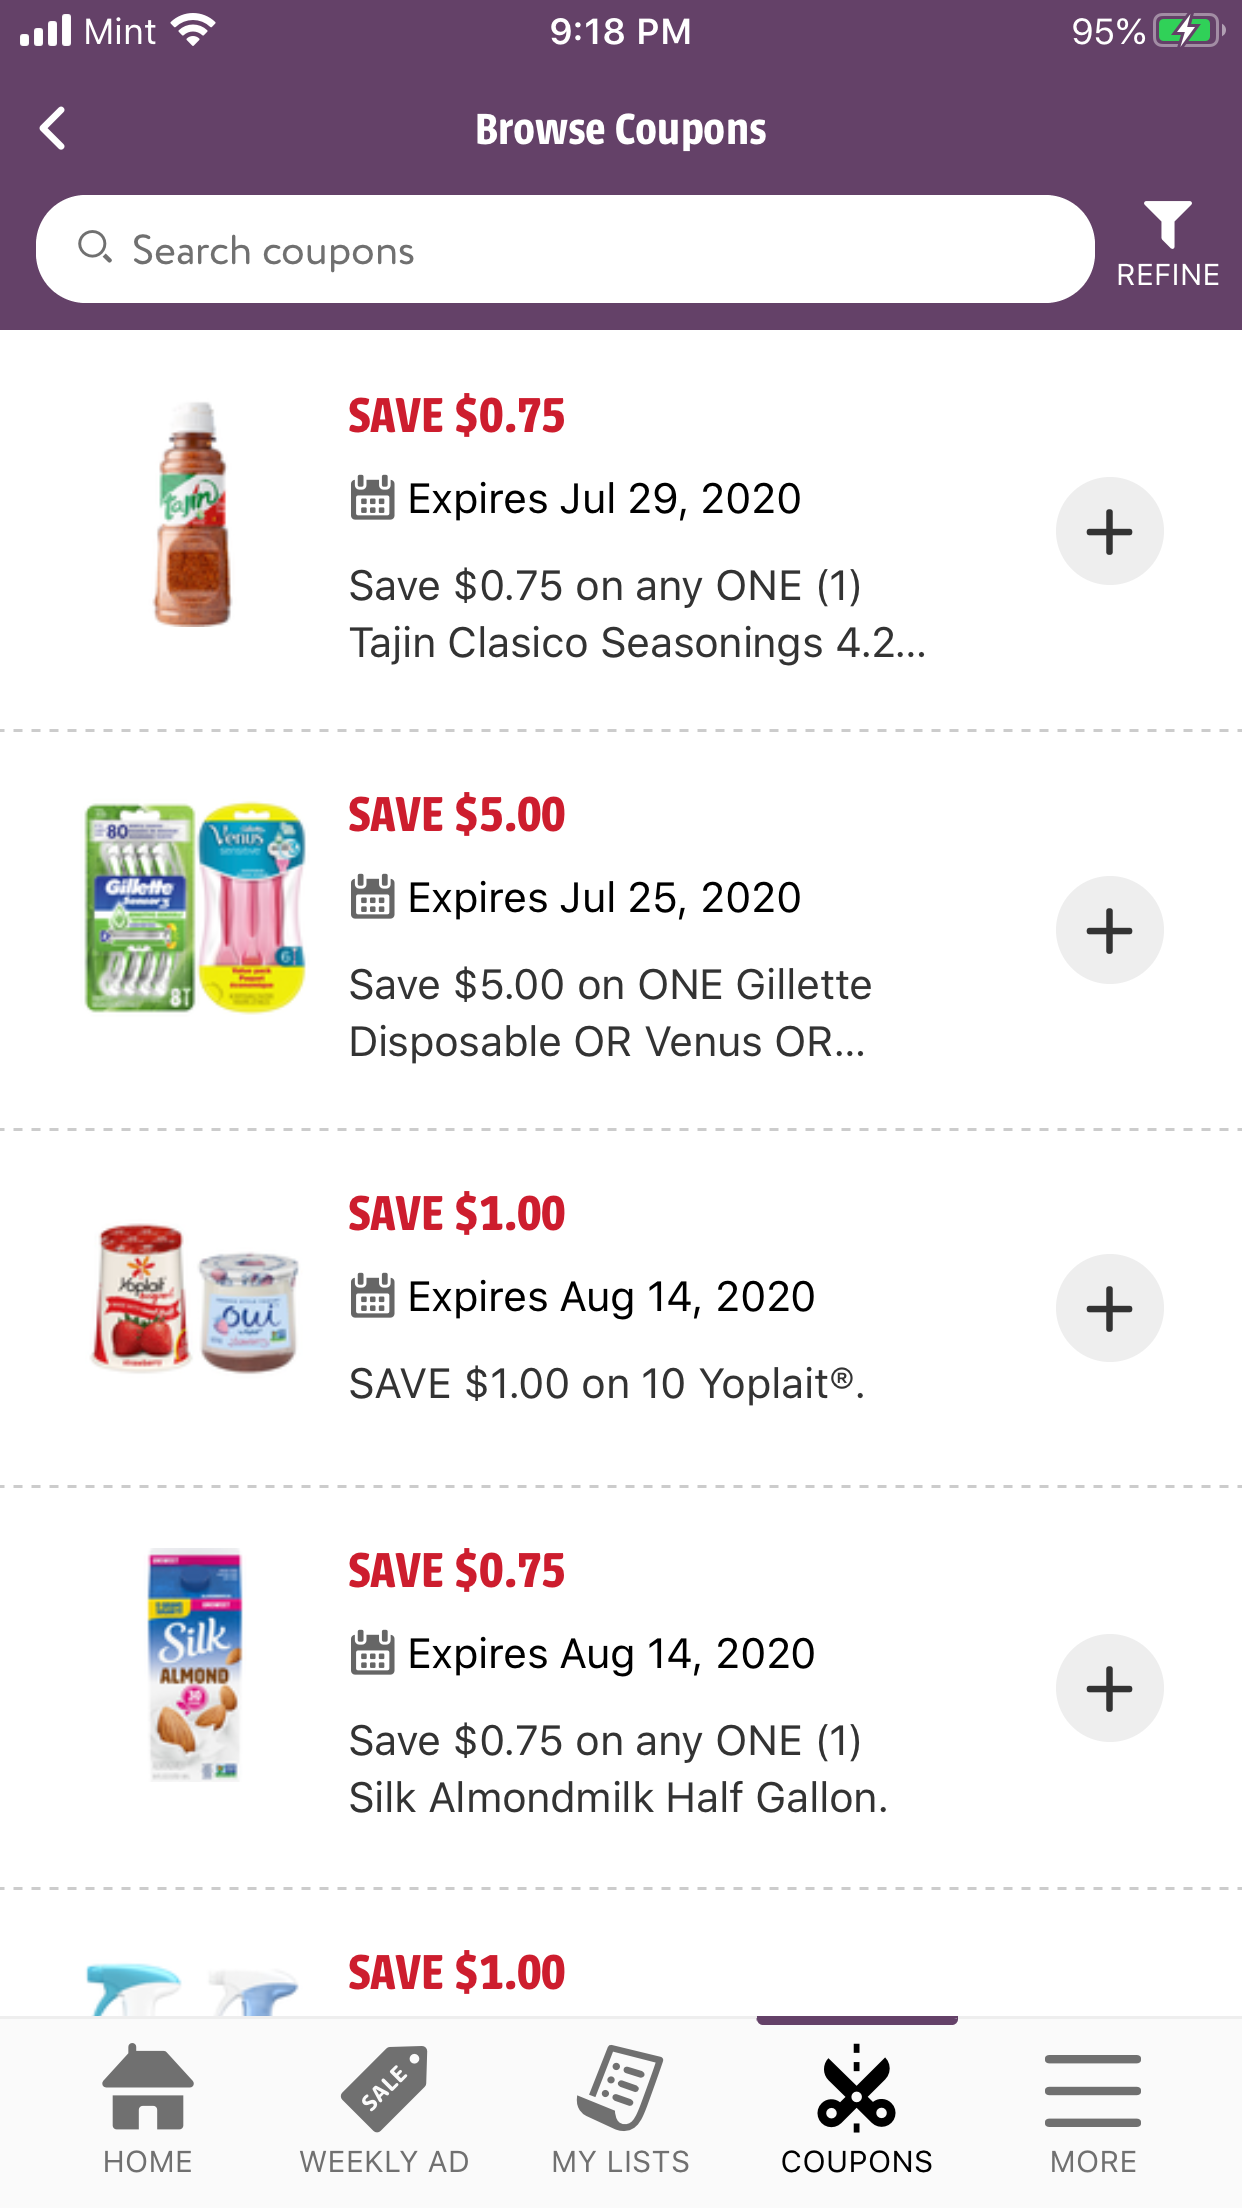 lucky you rewards app coupon clipping for grocery shopping